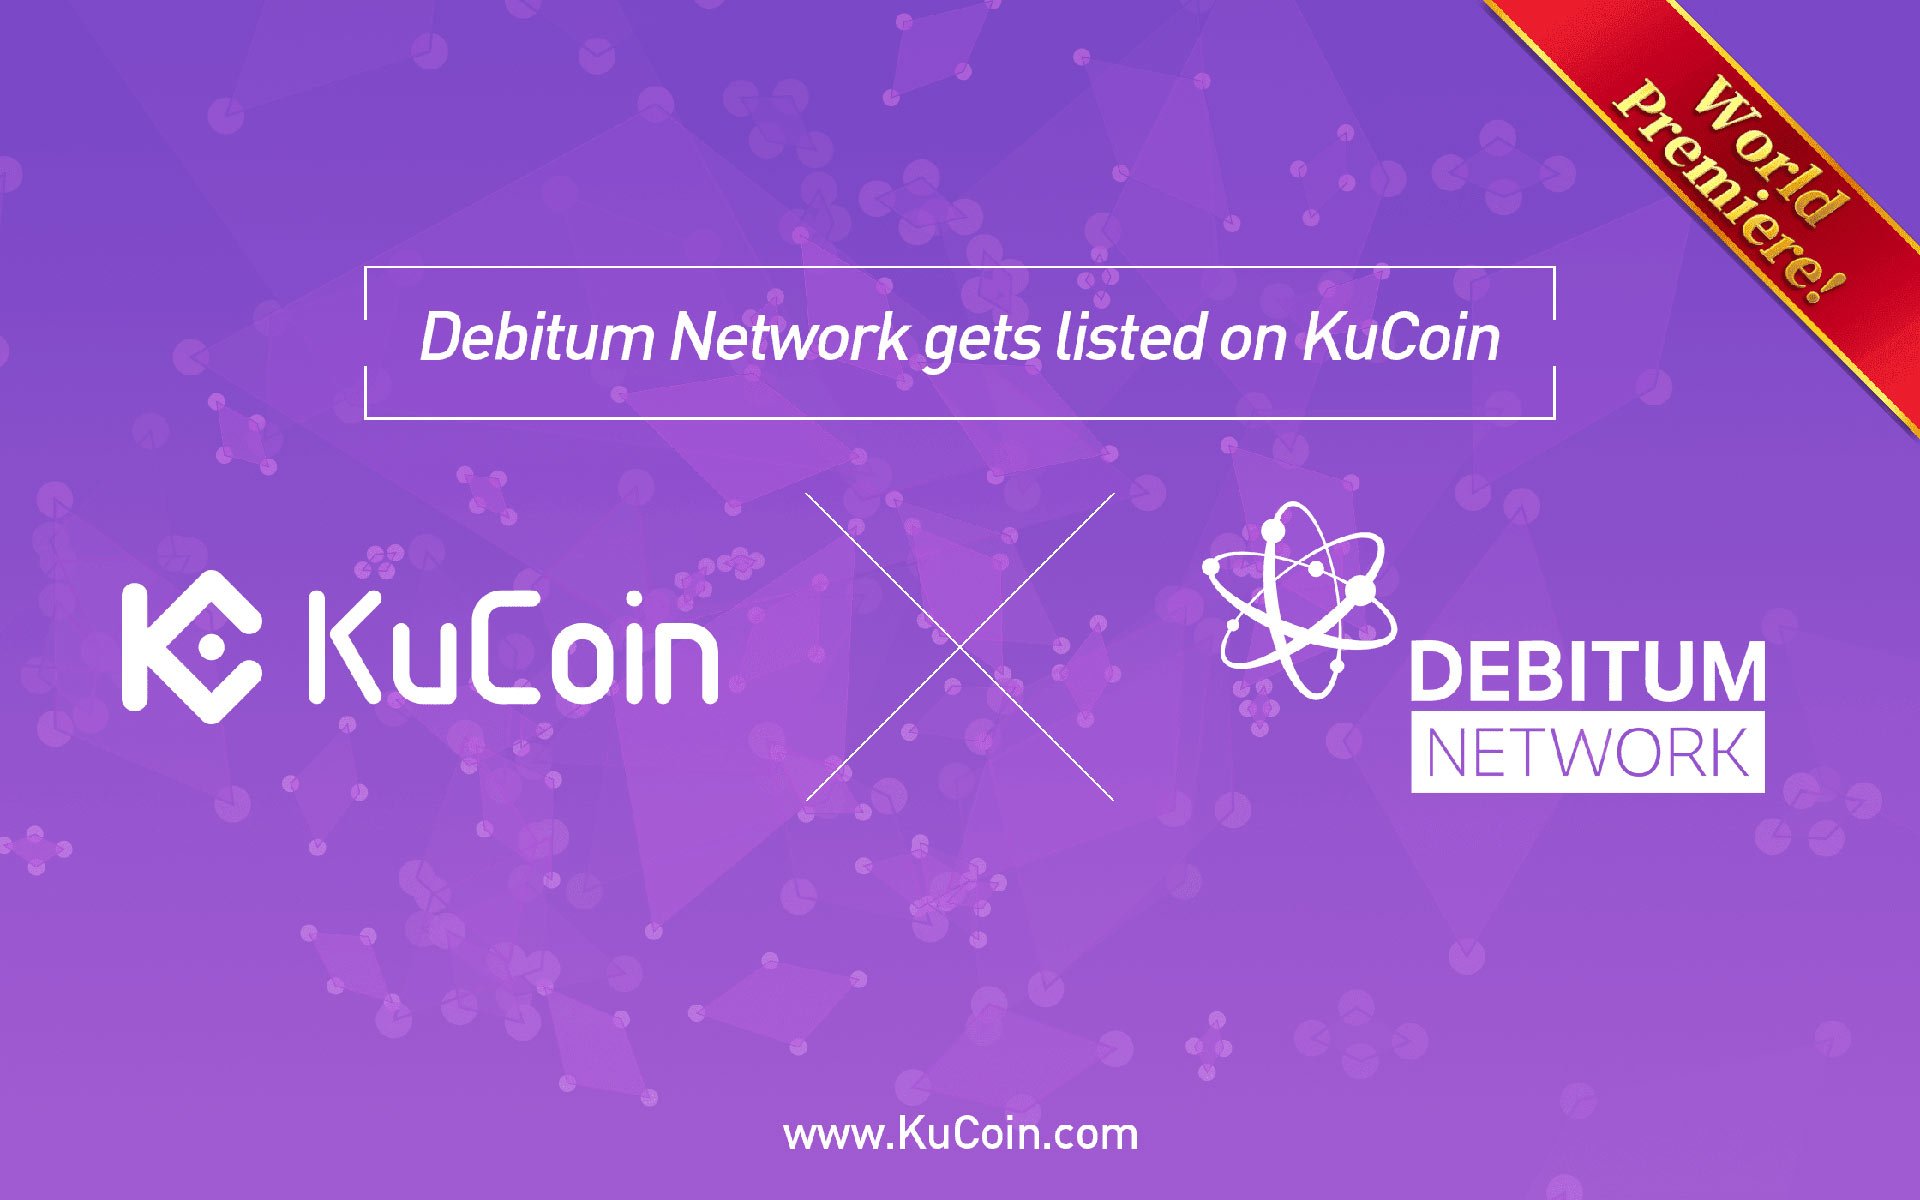 Debitum Network(DEB) Gets Listed on Kucoin! World Premiere!